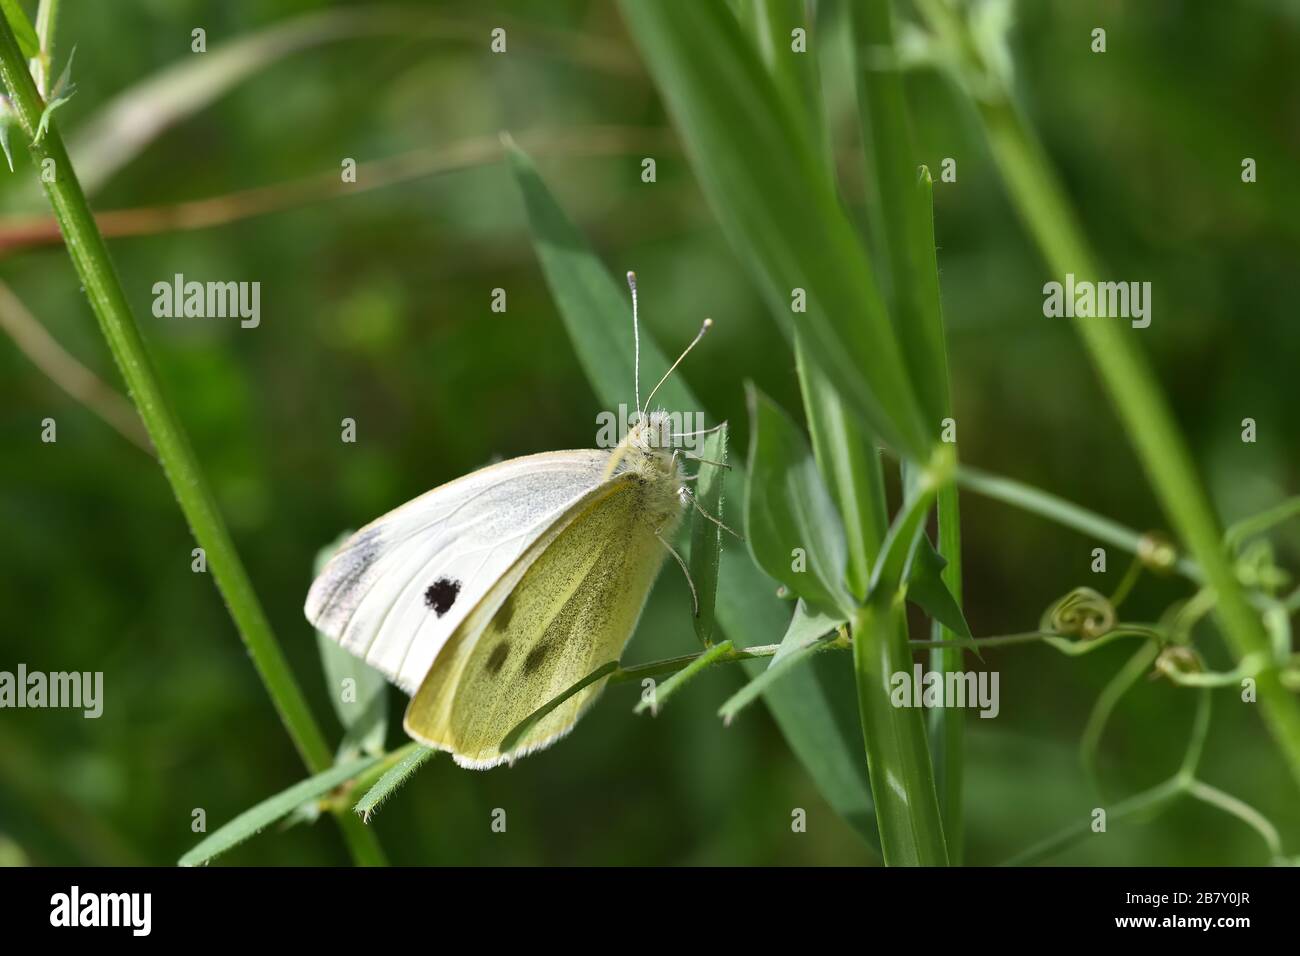 Cabbage white butterfly (Pieris brassicae) perched on a plant in the sun Stock Photo